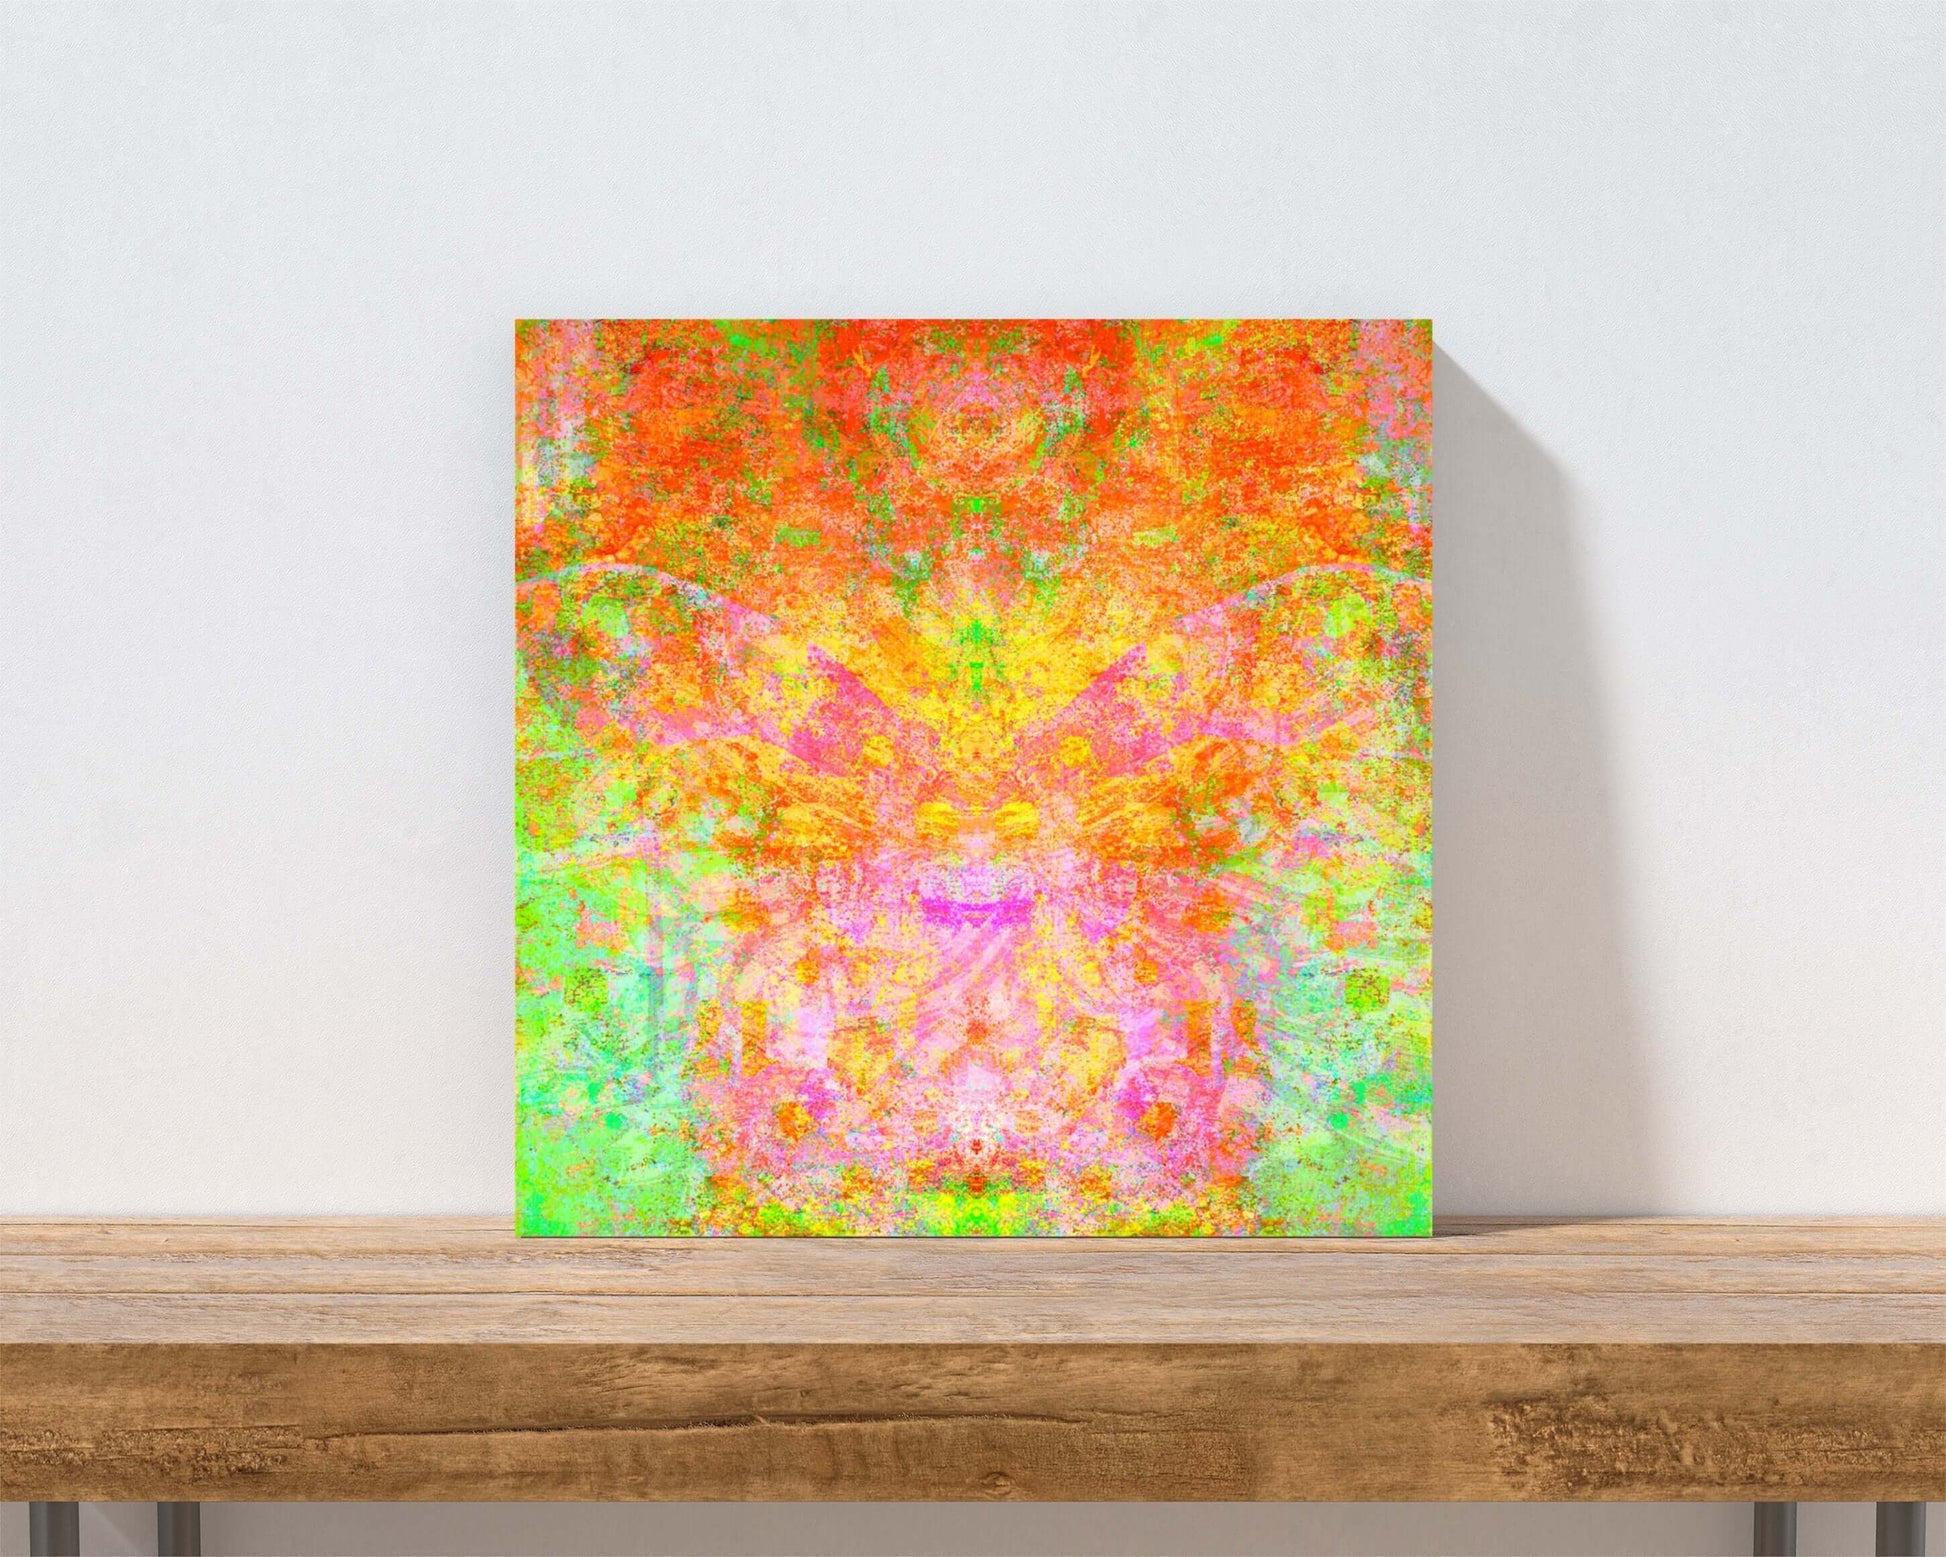 Green and Orange Butterfly Shaped “Firefly” Abstract Art Canvas Print Wall Art Small Canvas on Shelf